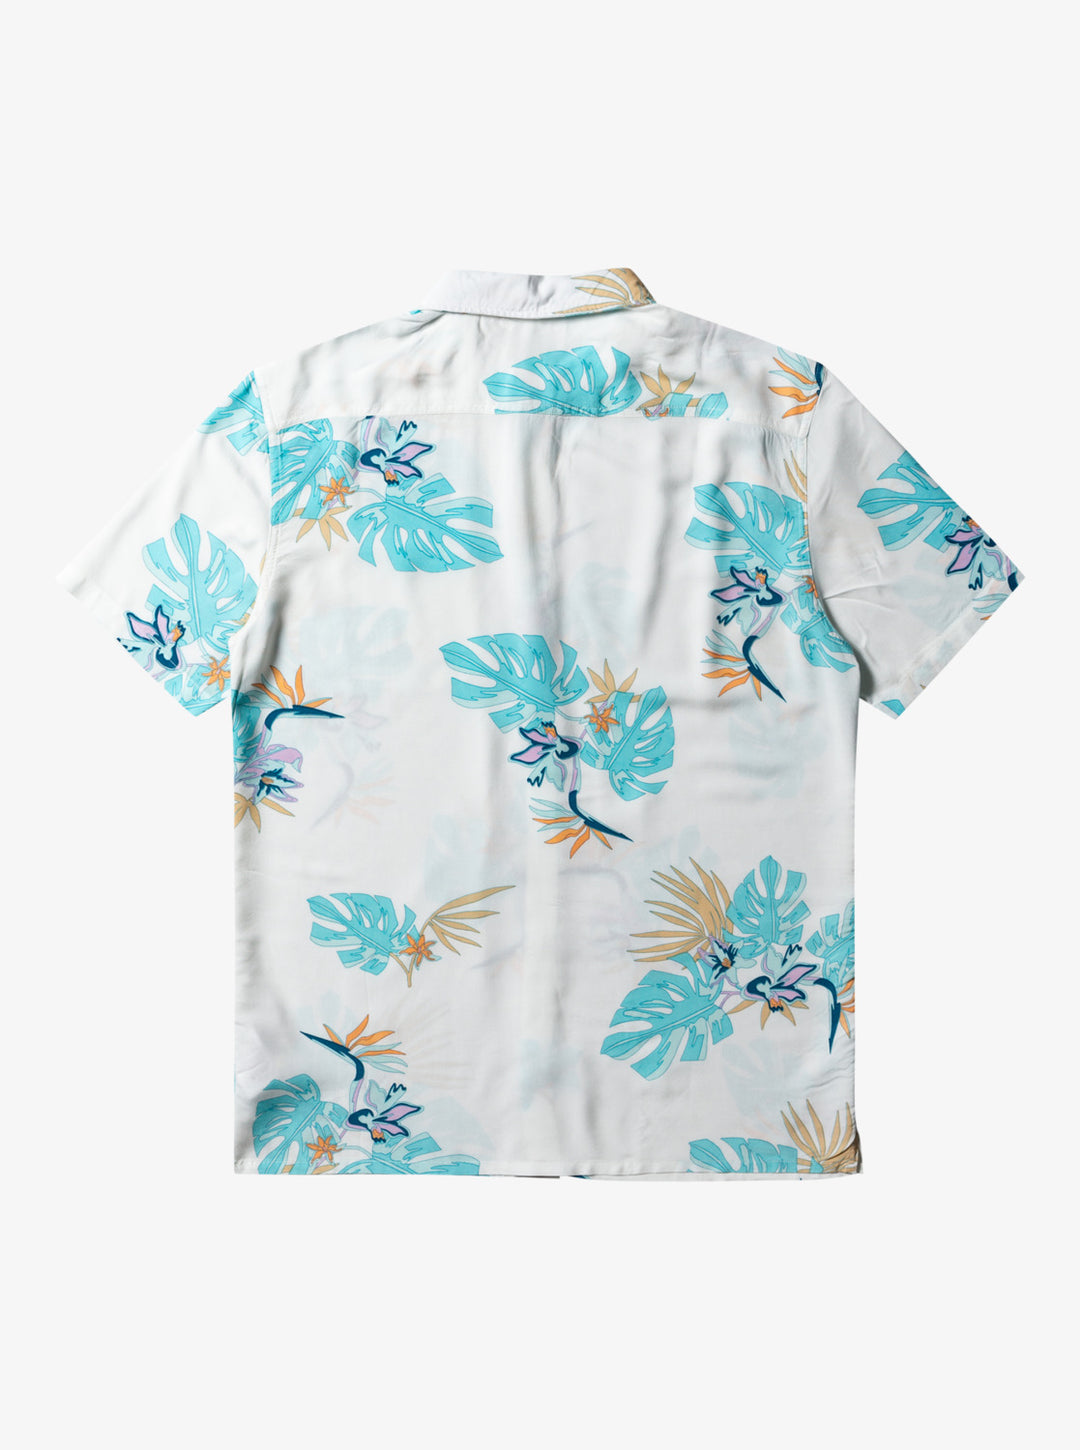 Quiksilver The Floral Short Sleeve Shirt - Snow White - Sun Diego Boardshop